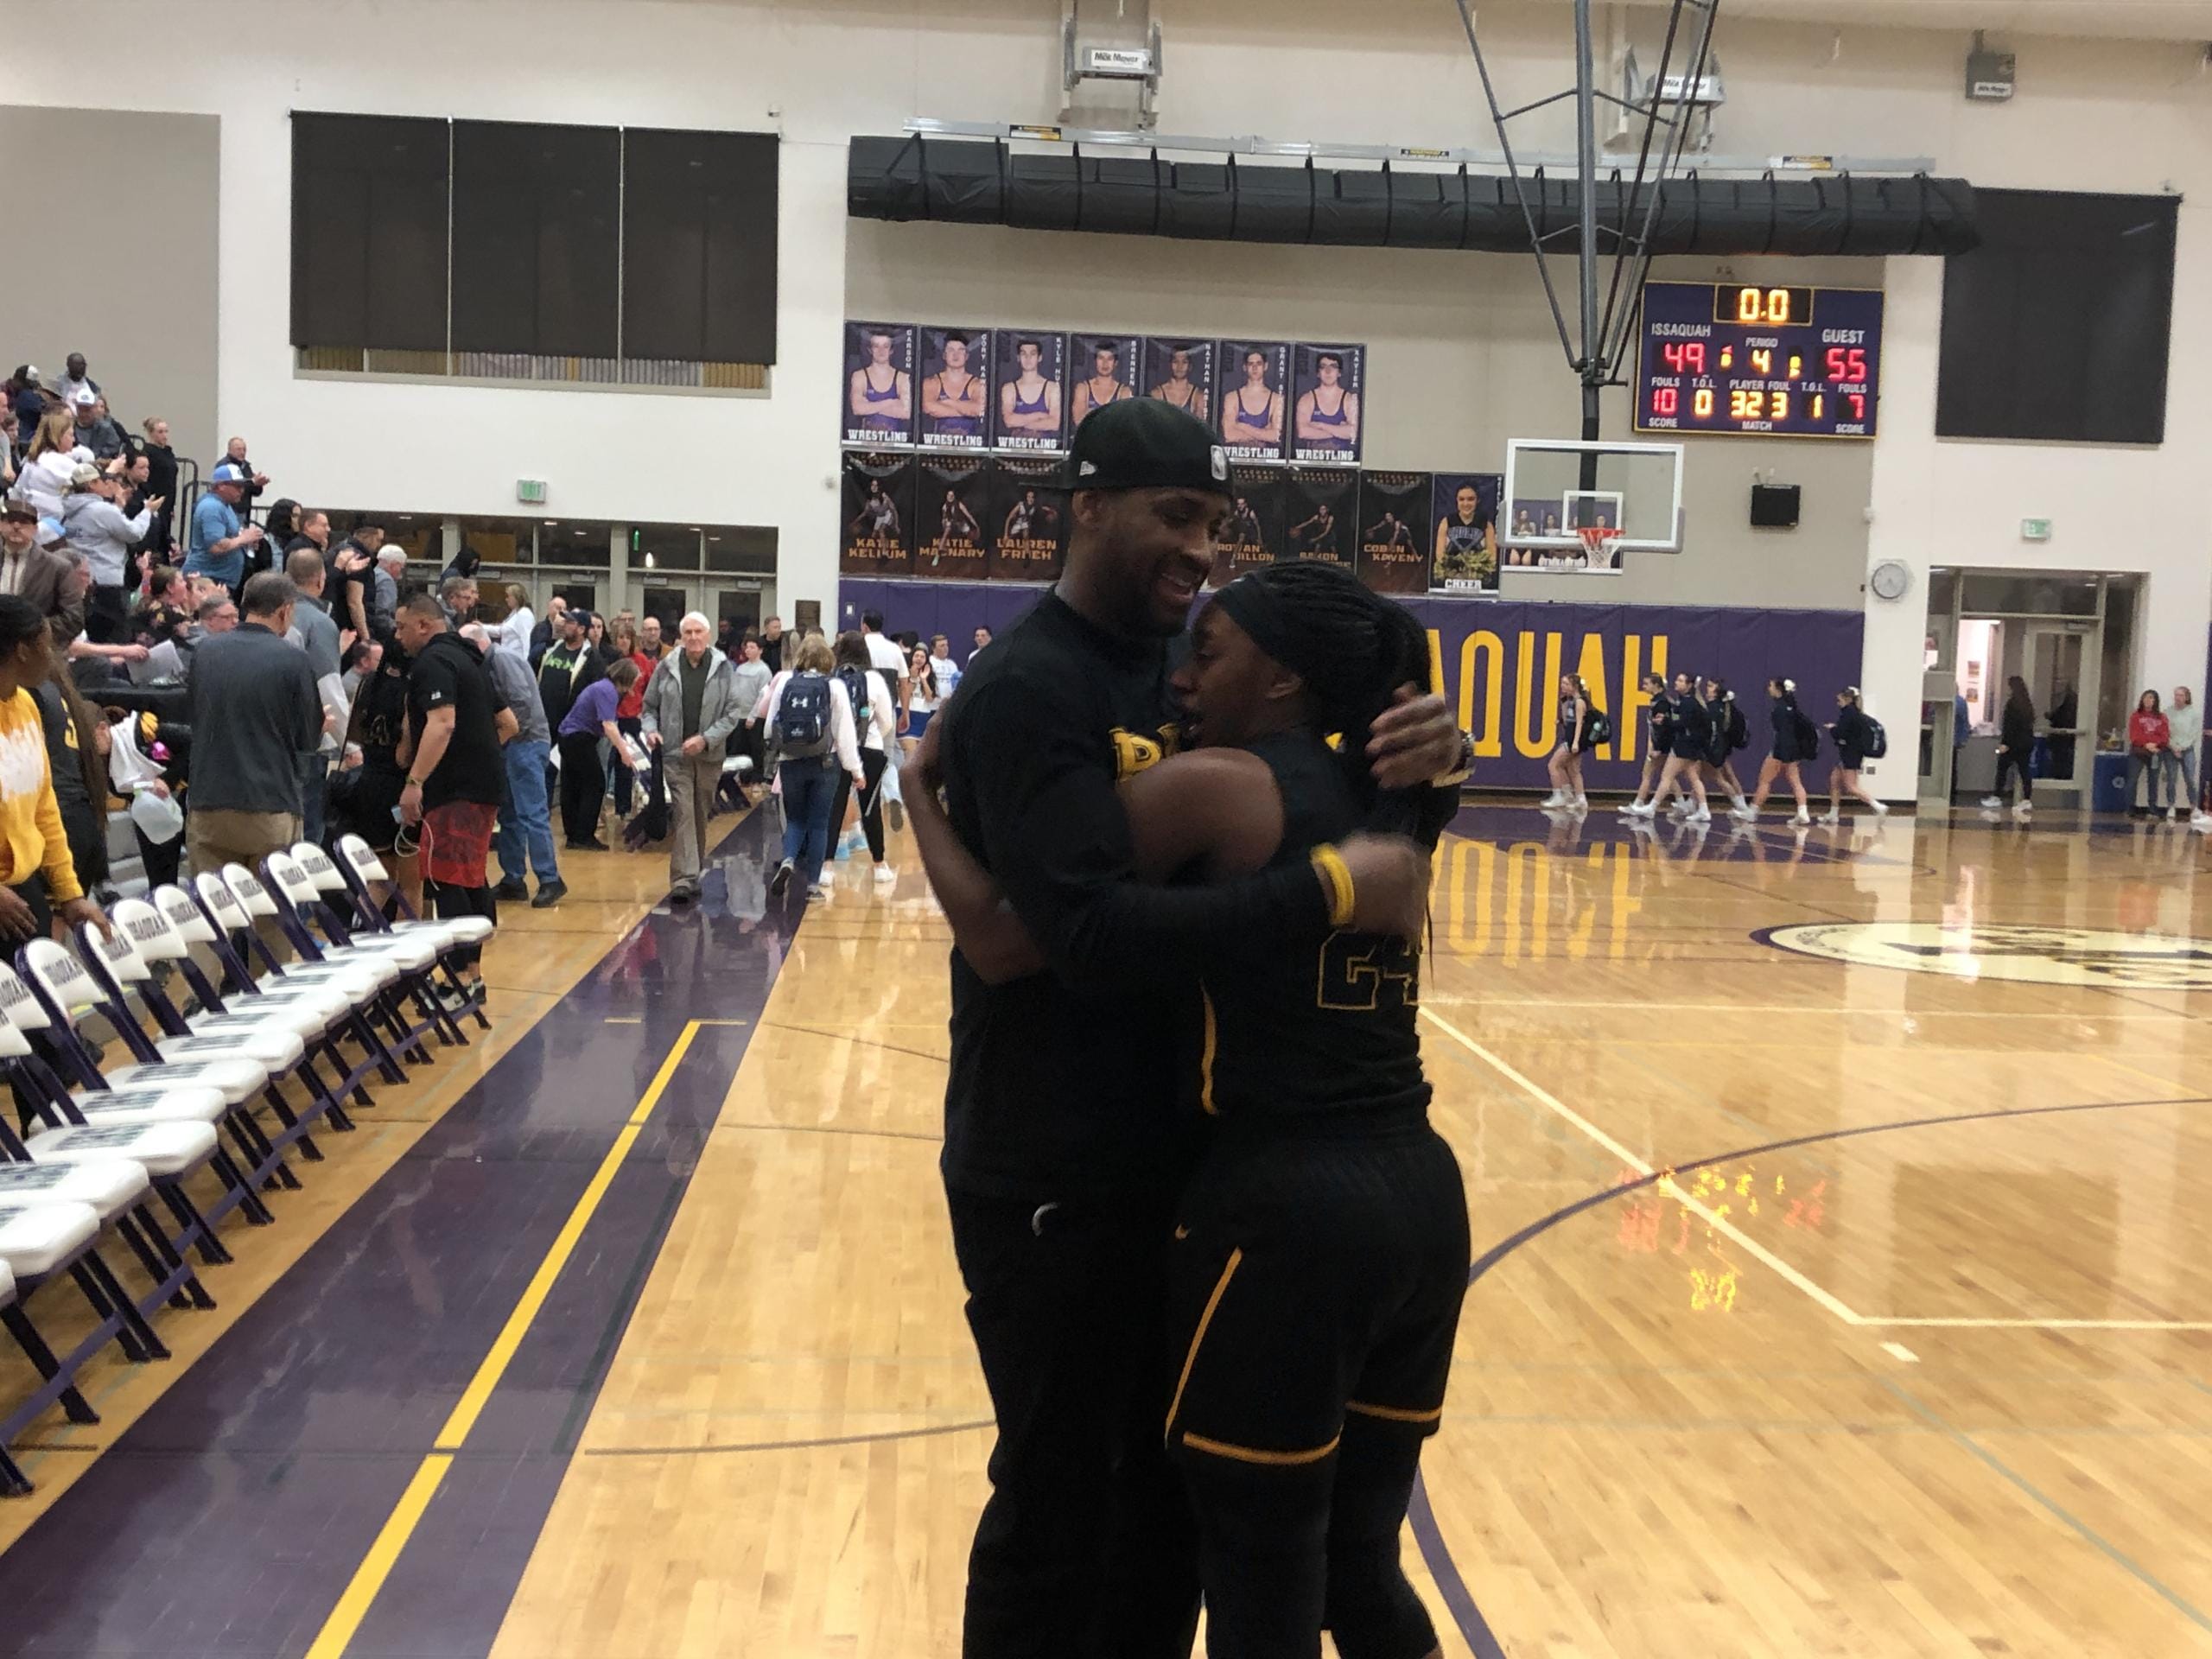 Hudson's Bay junior Kamelai Powell is embraced by her father, Kenan Powell, after the Eagles beat Meadowdale 55-49 on Saturday in the 3A state regionals at Issaquah.